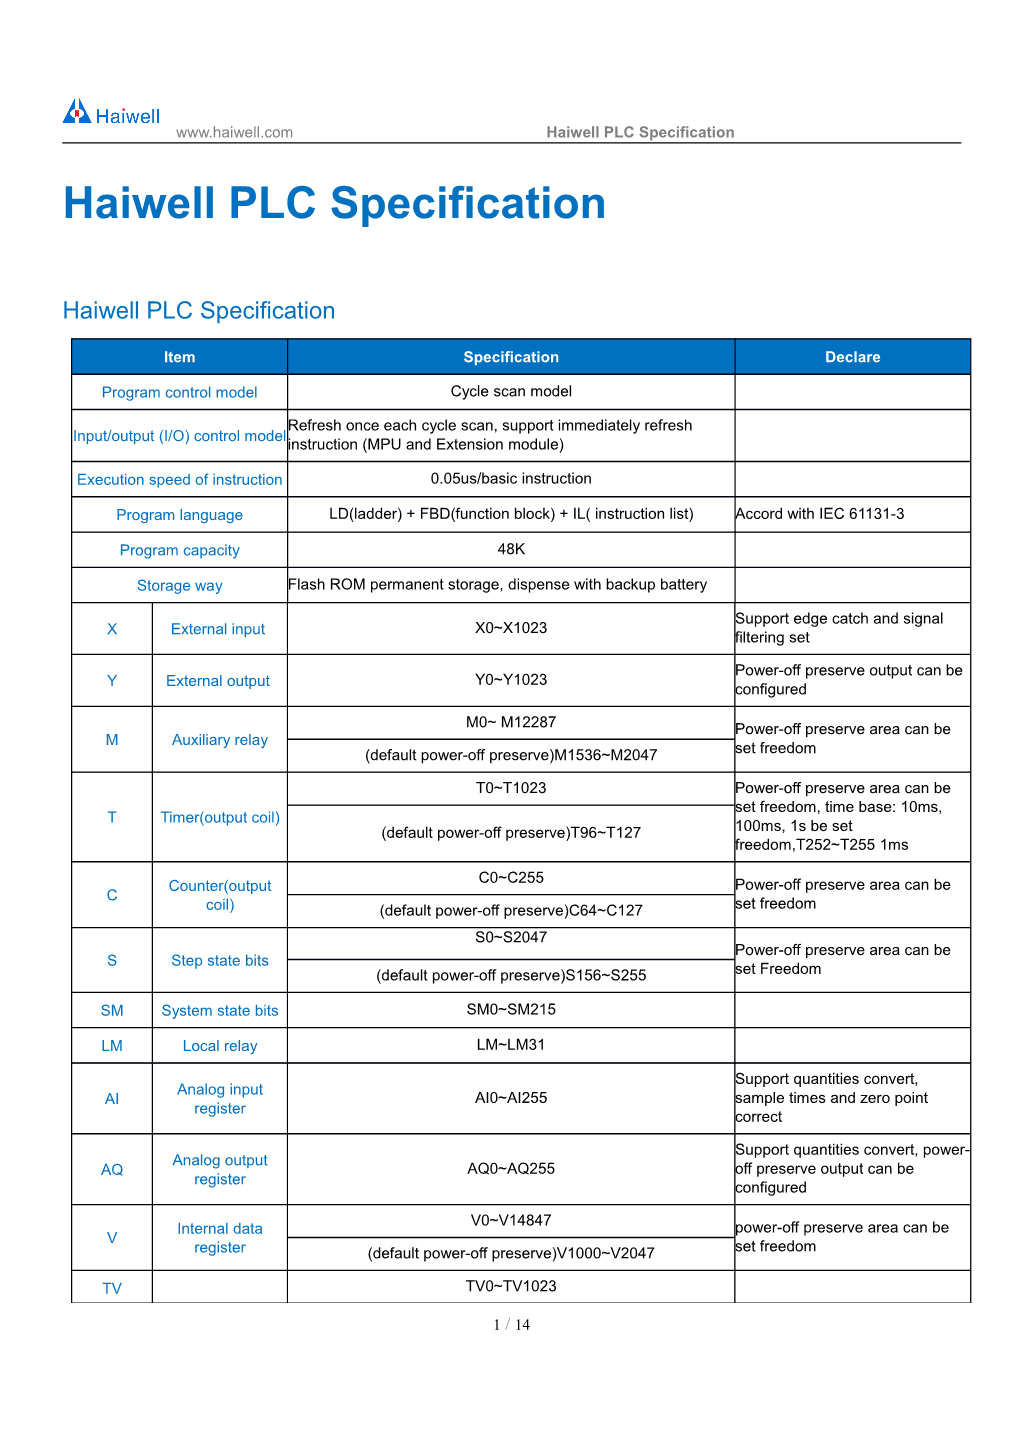 Haiwell PLC Specification